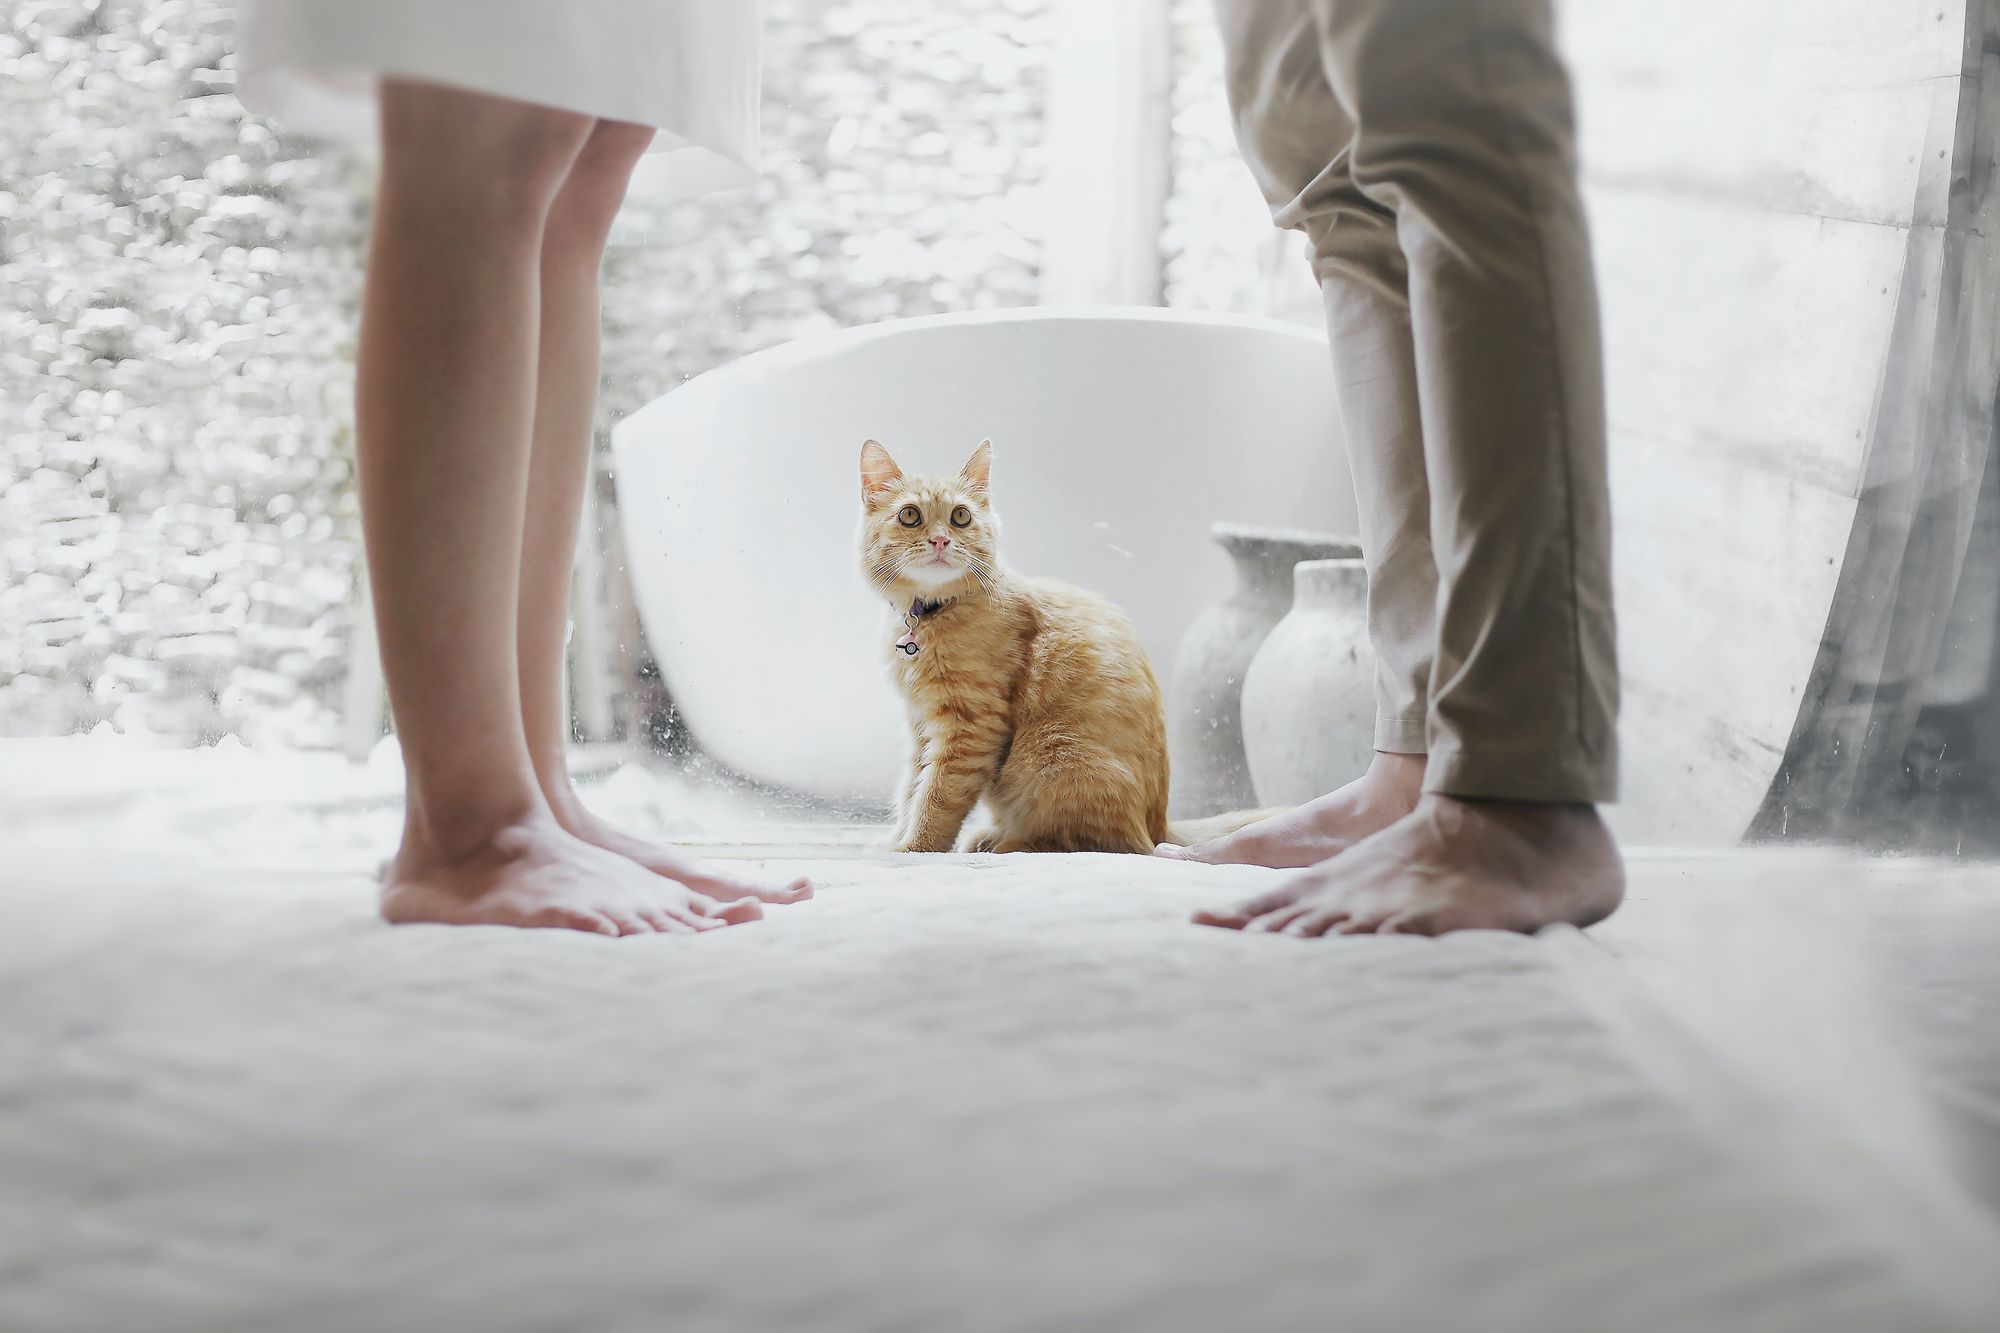 Two adults standing in front of each other, only the knees down are visible, an orange cat between them